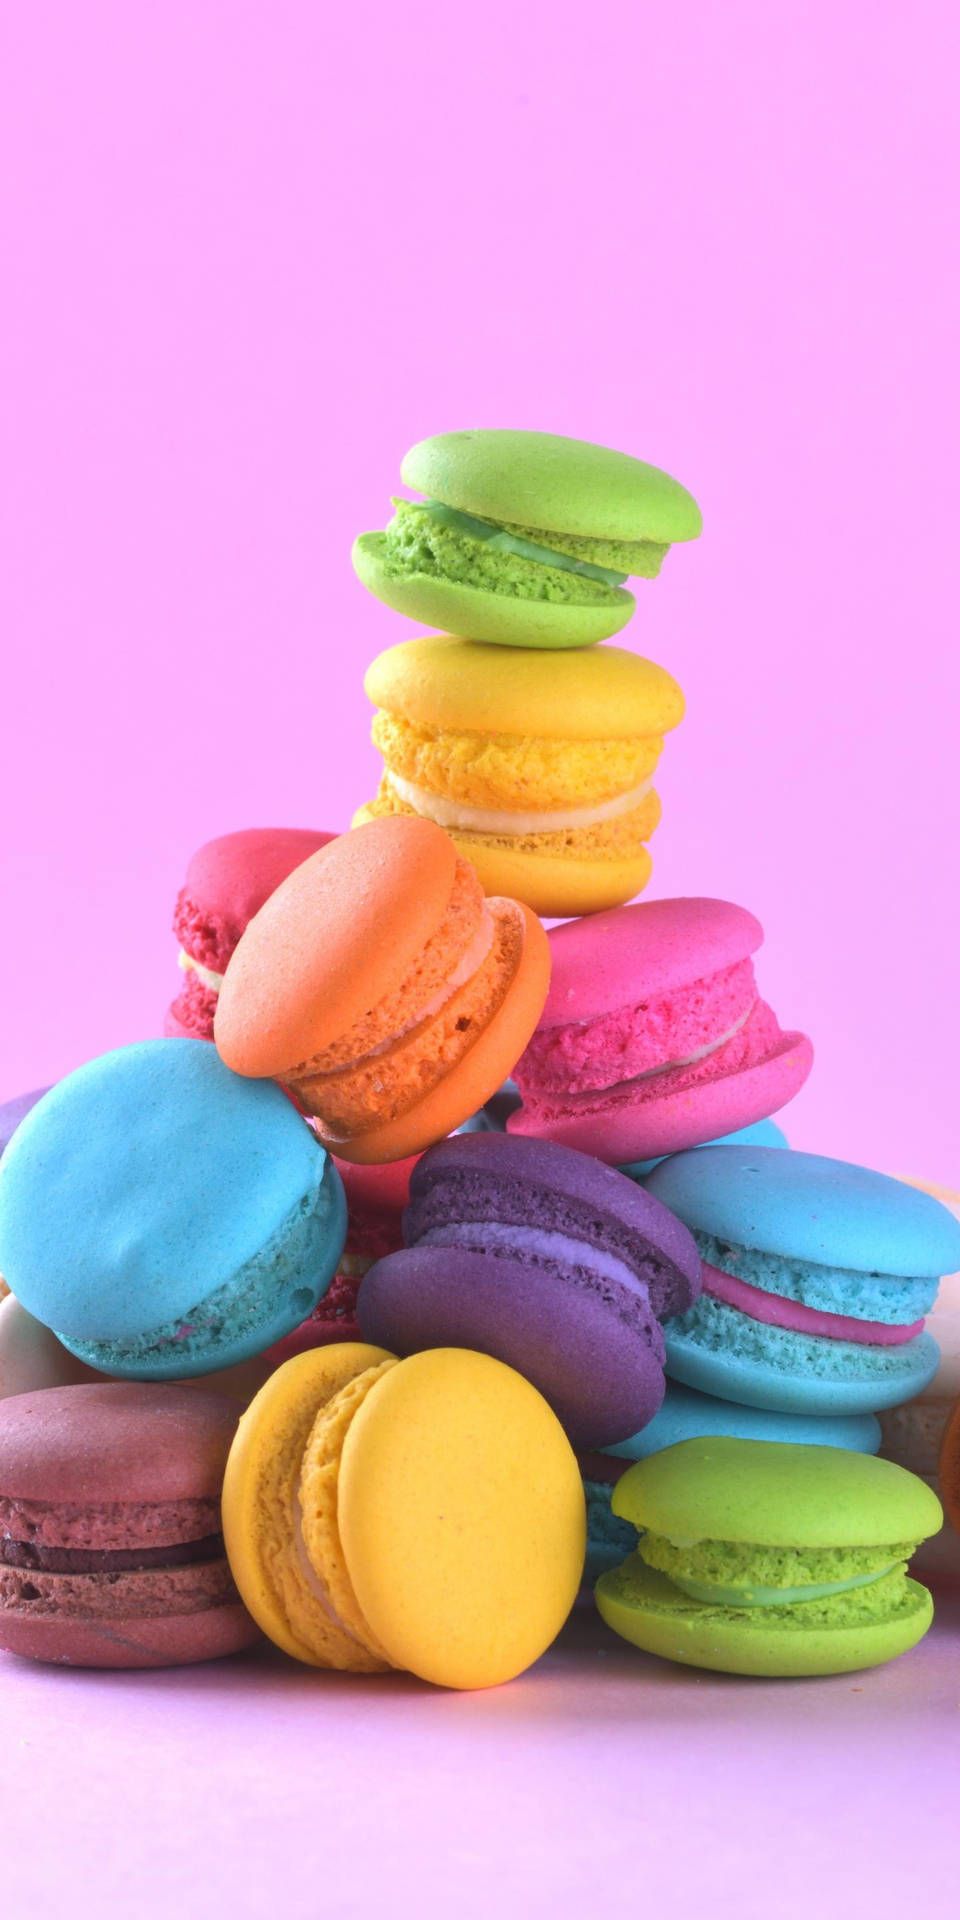 A pile of colorful macaroons on top - Colorful, macarons